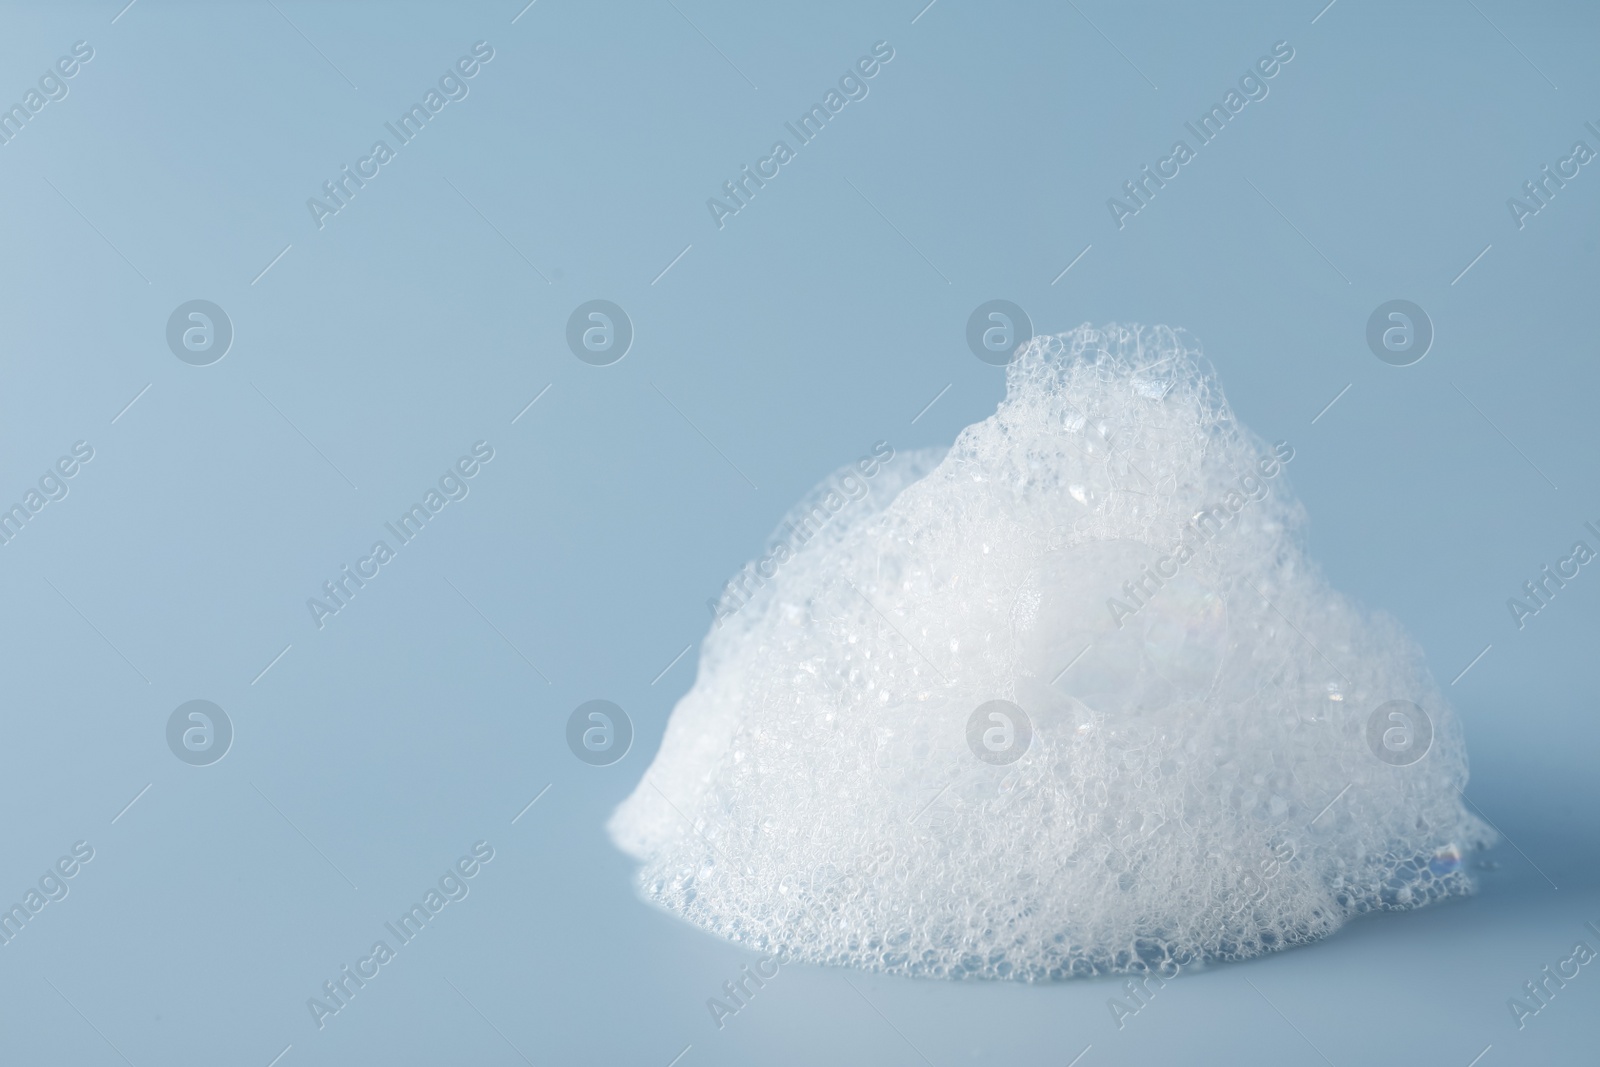 Photo of Drop of fluffy bath foam on light blue background. Space for text